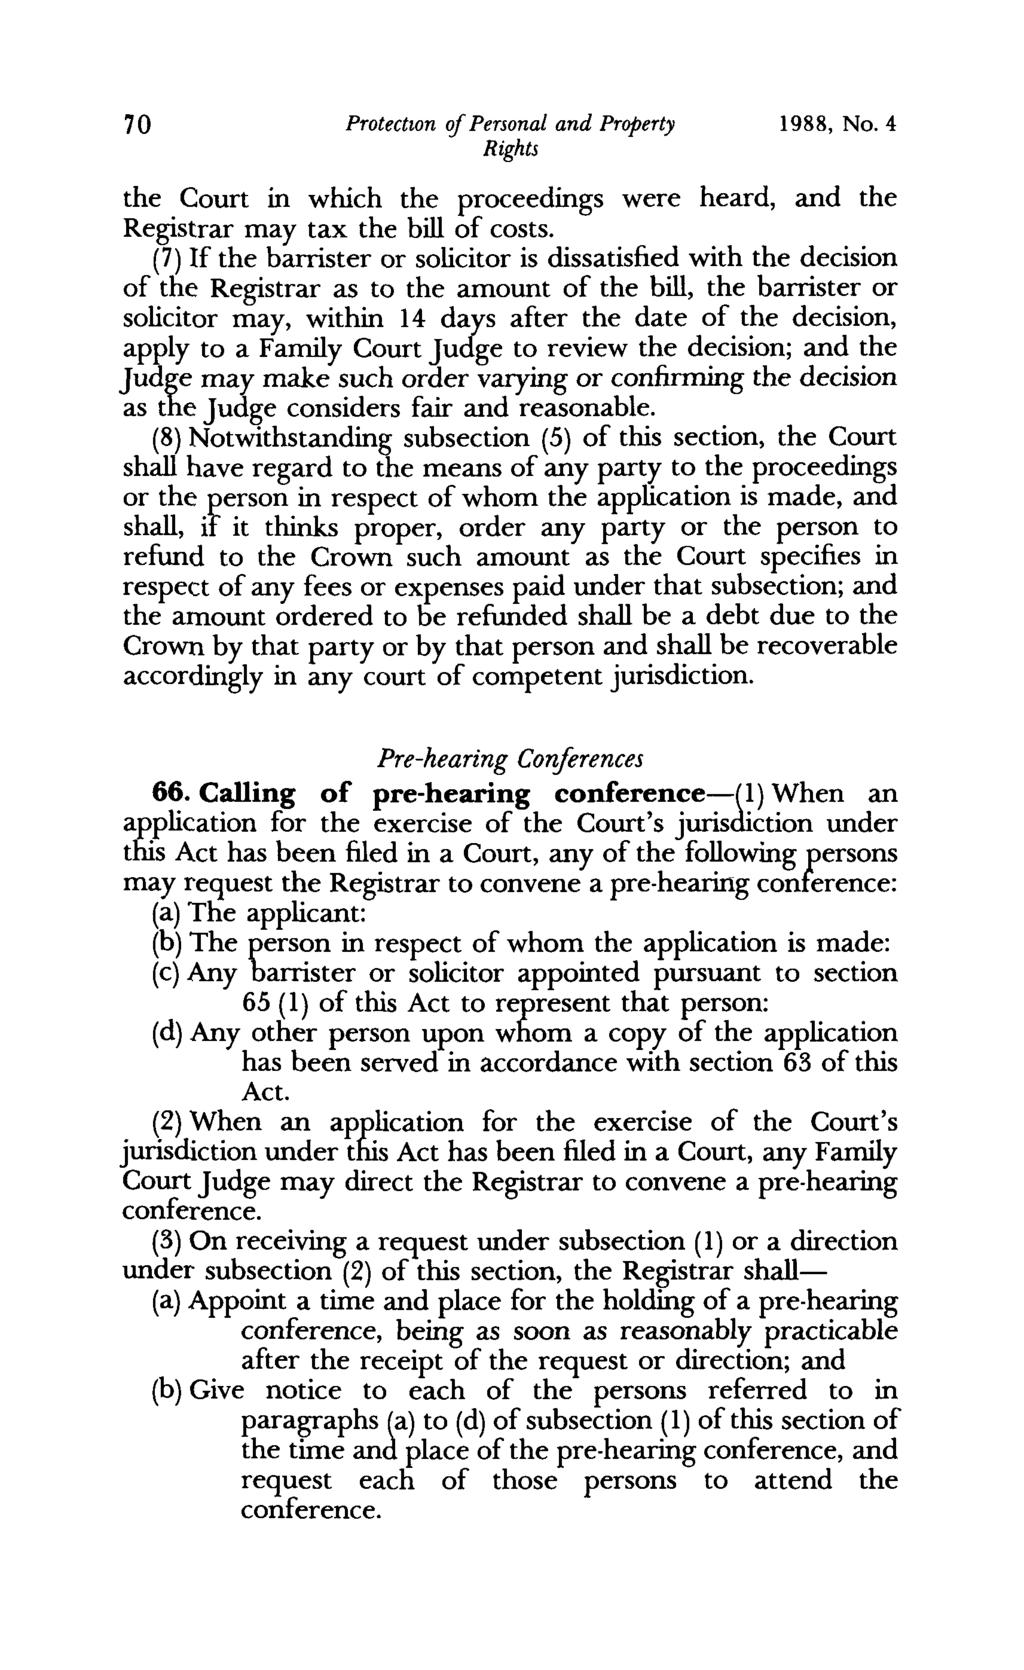 70 ProtectIOn 0/ Personal and Property 1988, No. 4 the Court in which the proceedings were heard, and the Registrar may tax the bill of costs.